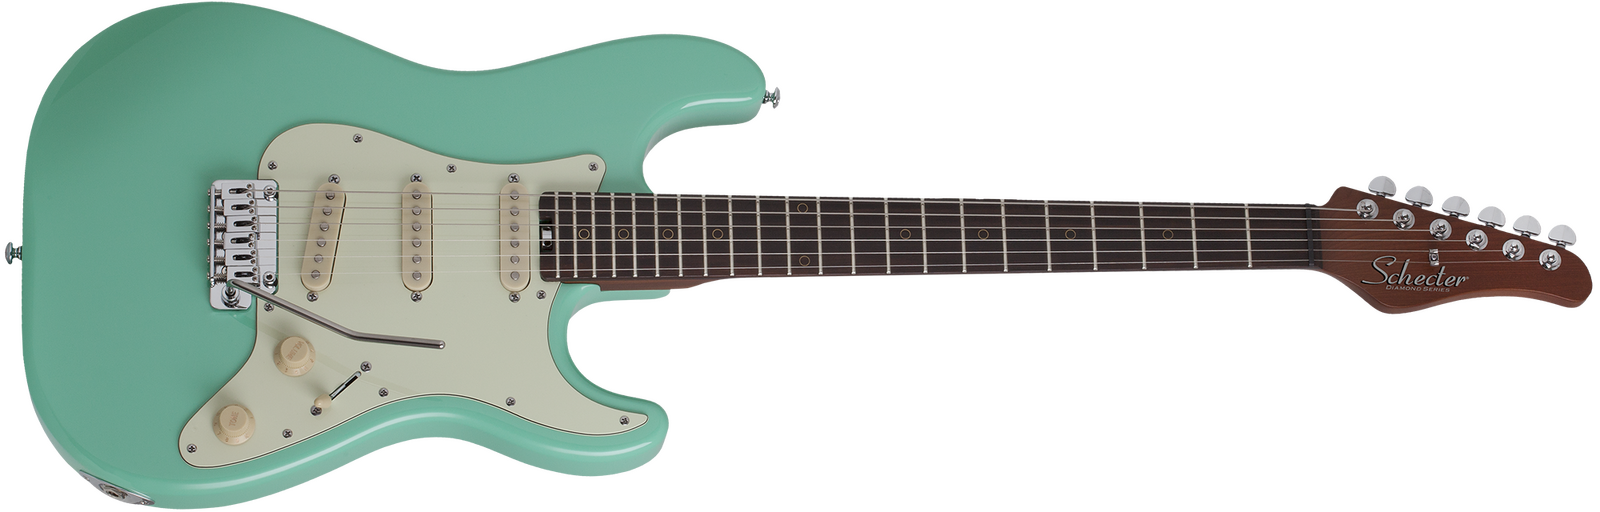 Schecter Nick Johnston Traditional Electric Guitar in Atomic Green